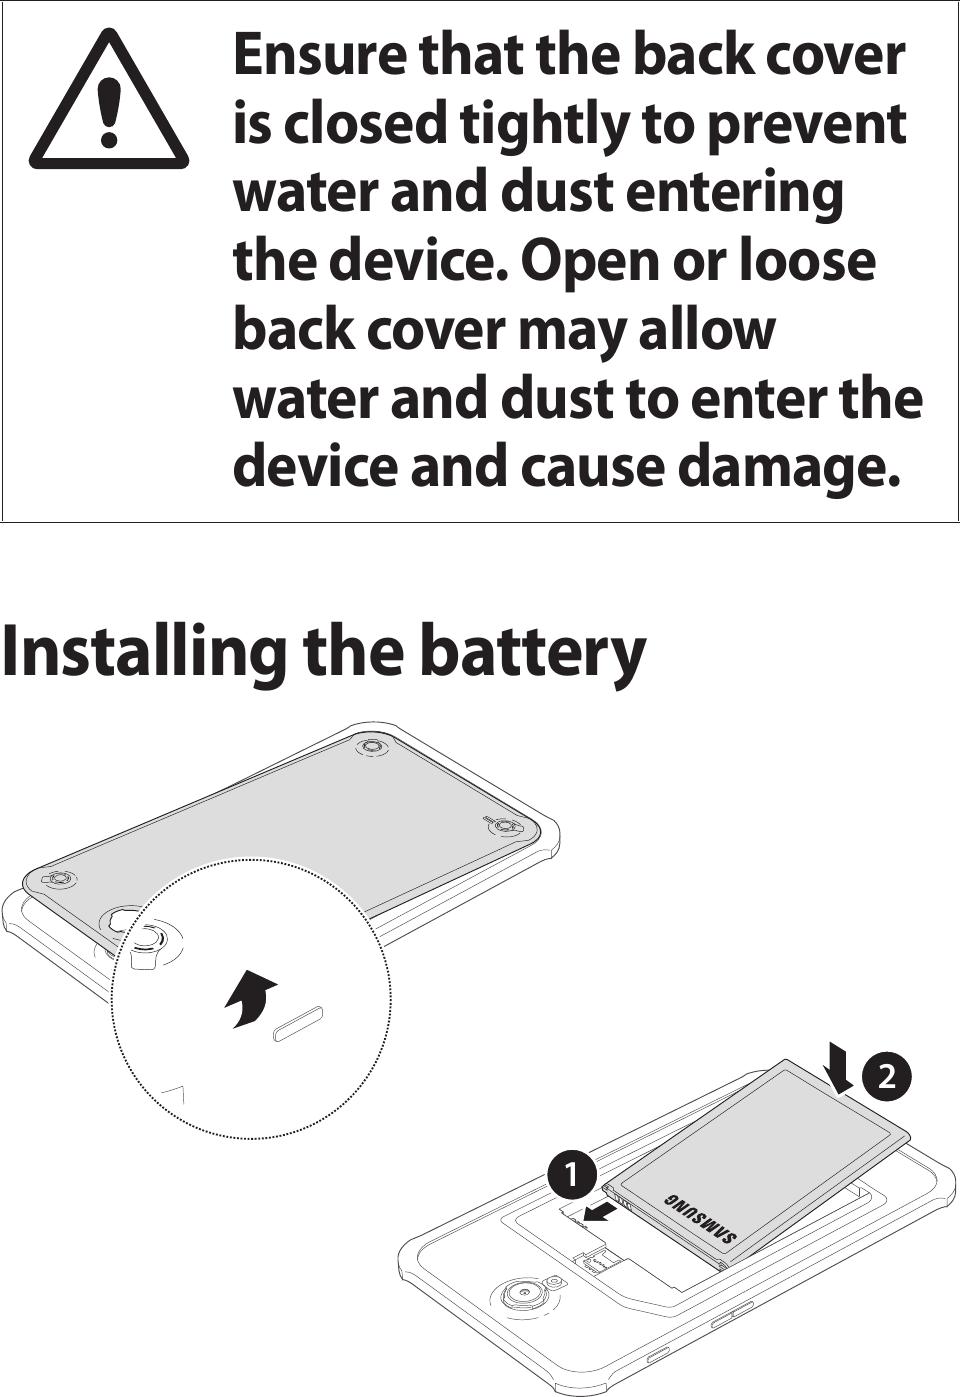 Ensure that the back cover is closed tightly to prevent water and dust entering the device. Open or loose back cover may allow water and dust to enter the device and cause damage.Installing the battery12